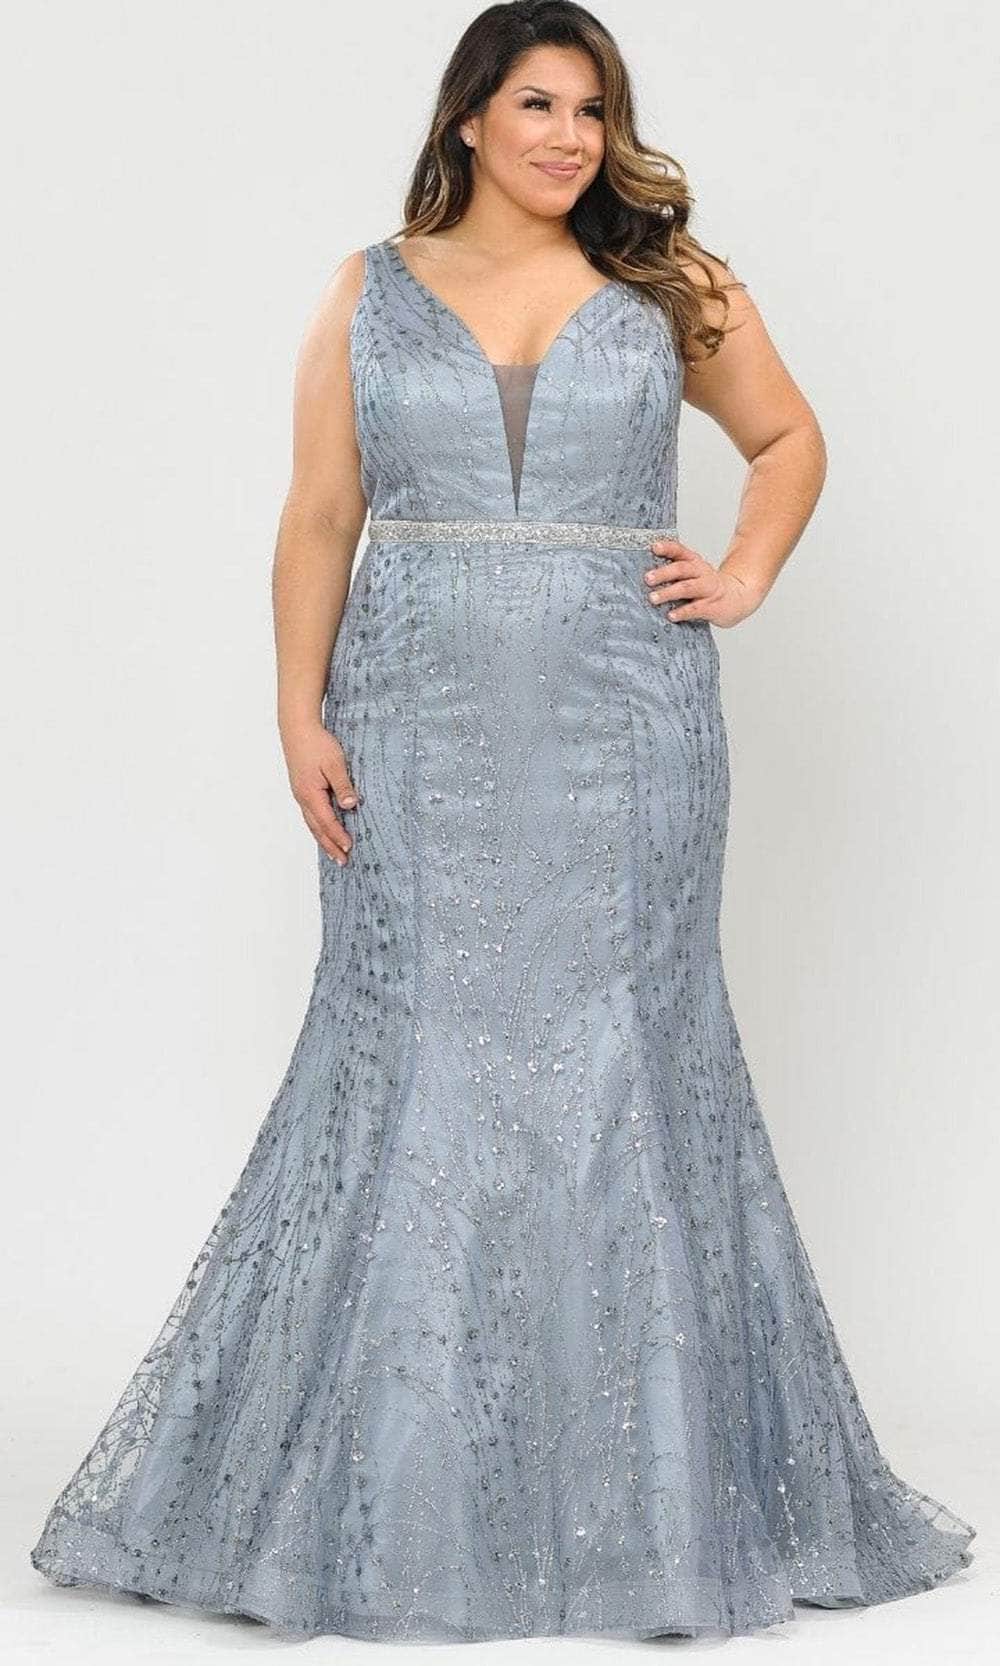 Image of Poly USA W1092 - Glitter Mermaid Evening Gown